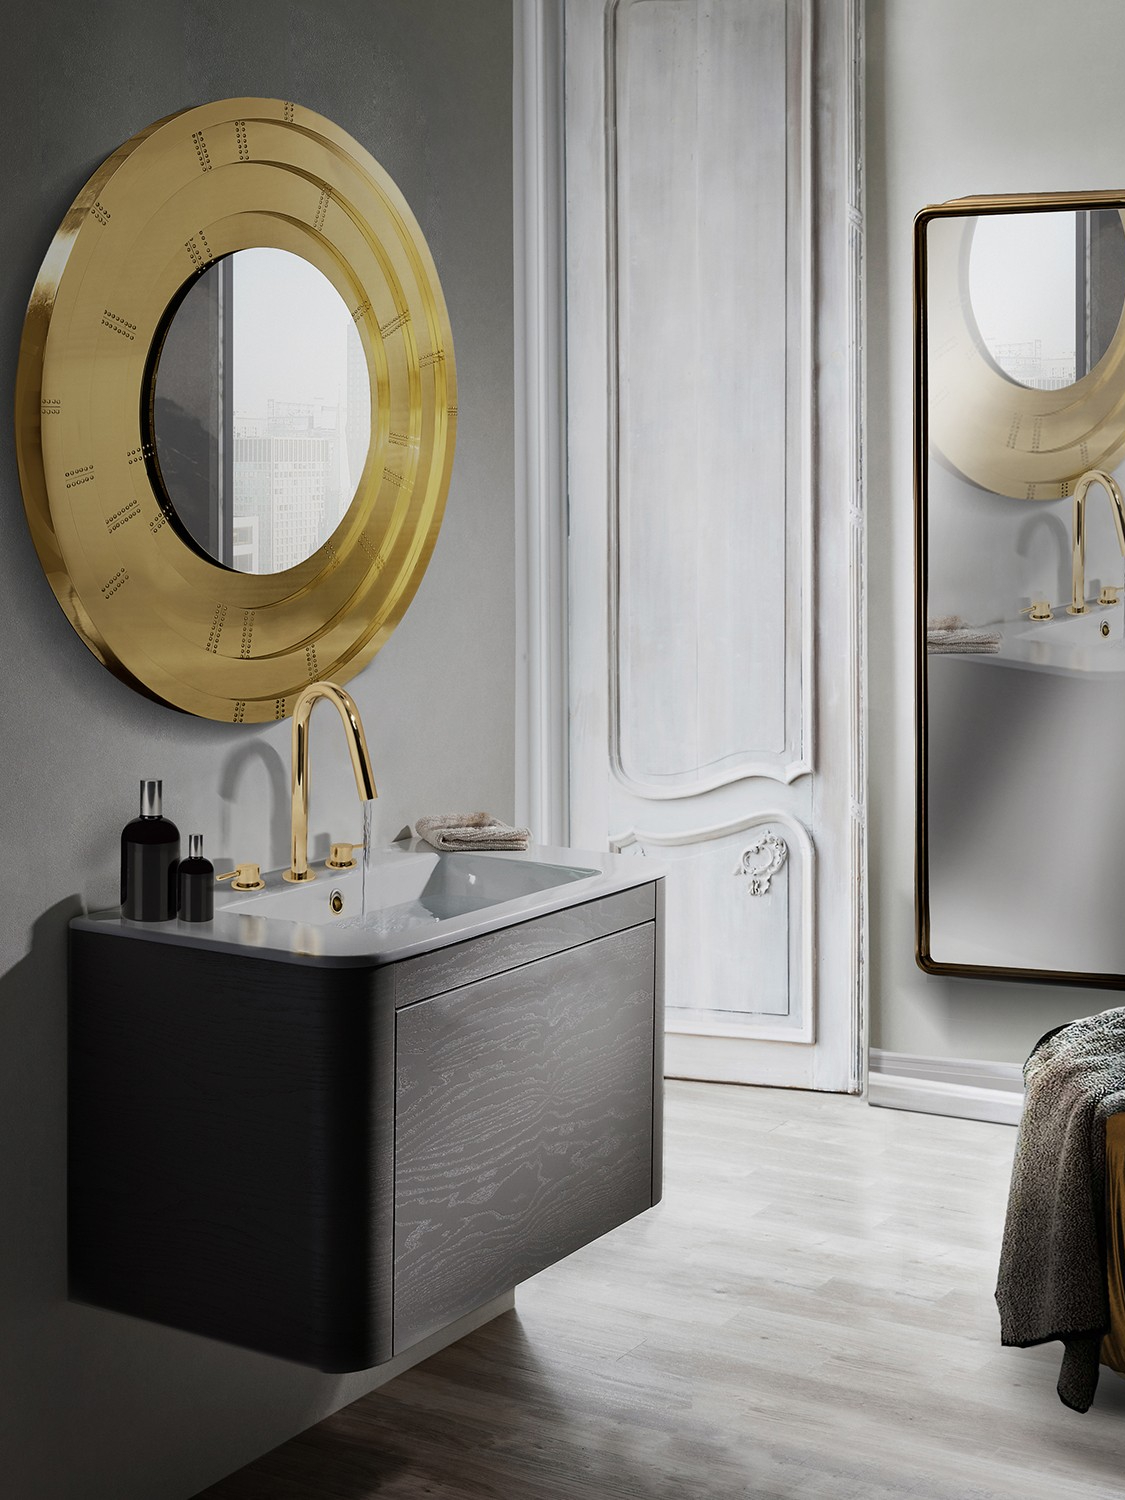 Contemporary Bathroom Style With Wonder - Home'Society